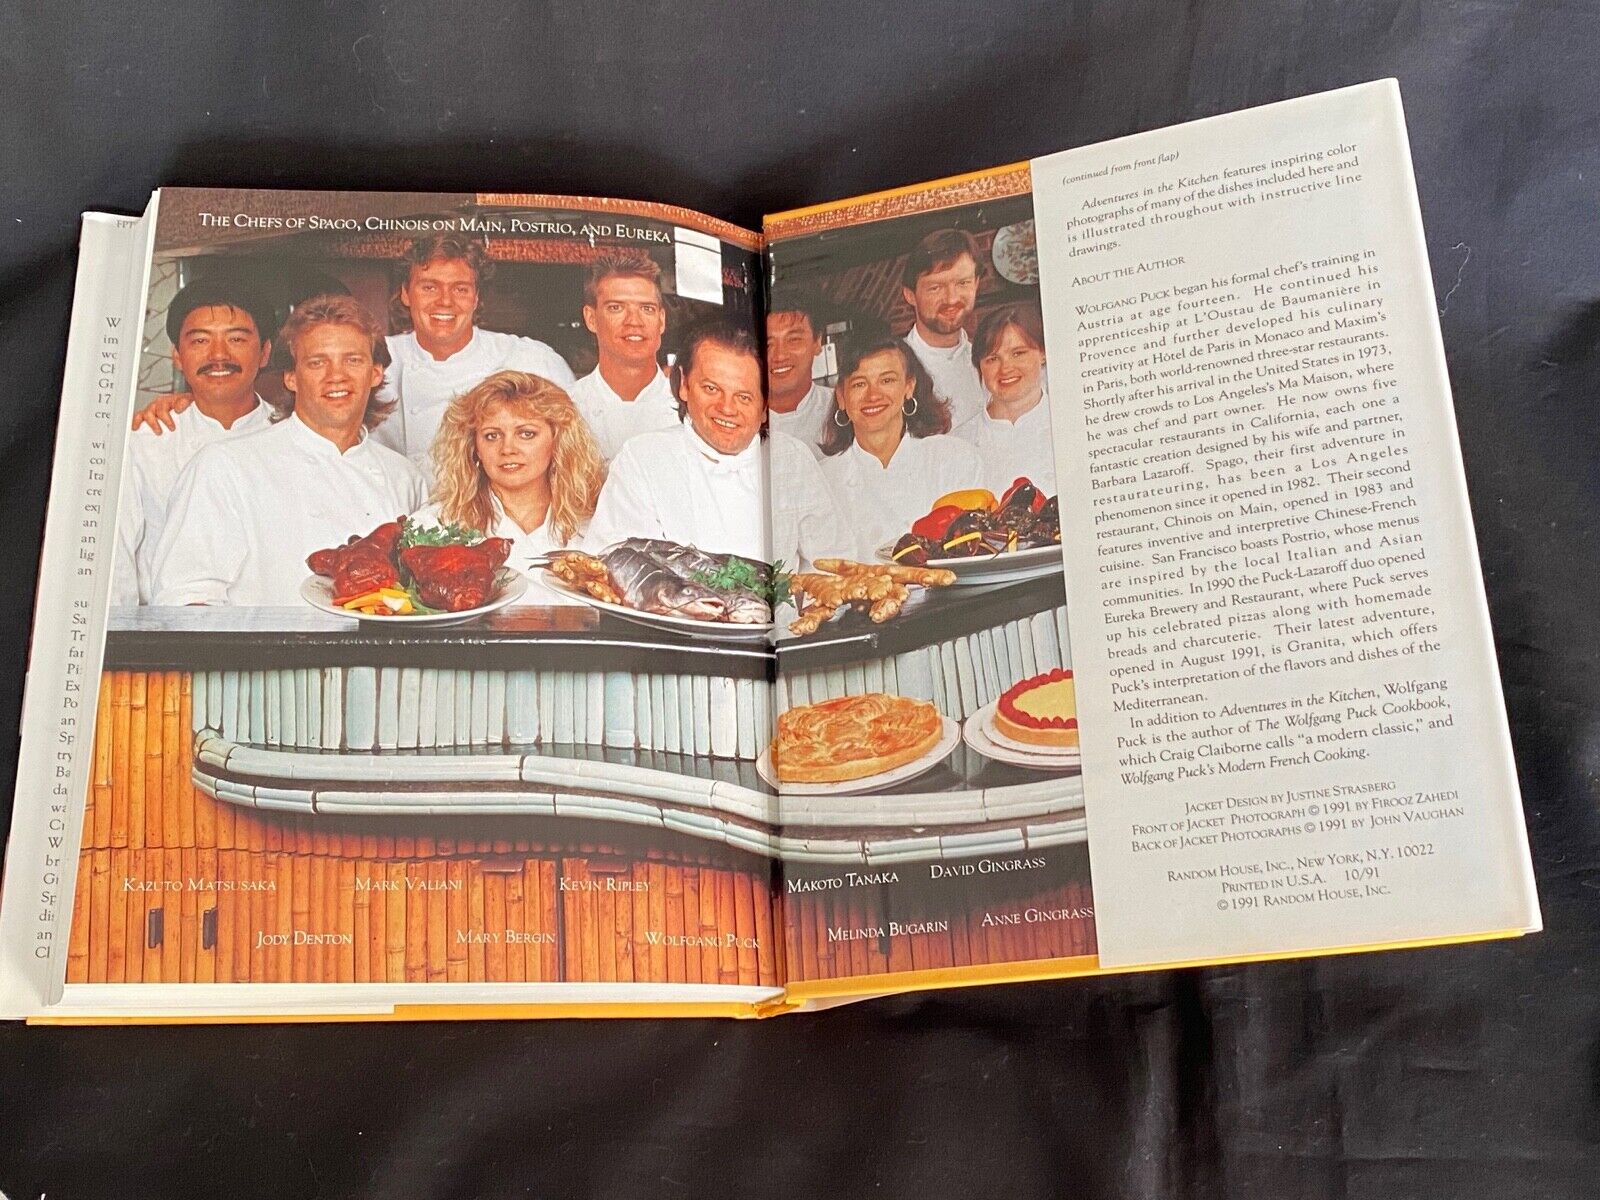 WOLFGANG PUCK SIGNED "SPAGO" APRON + "ADVENTURES IN THE KITCHEN" BOOK Без бренда - фотография #8